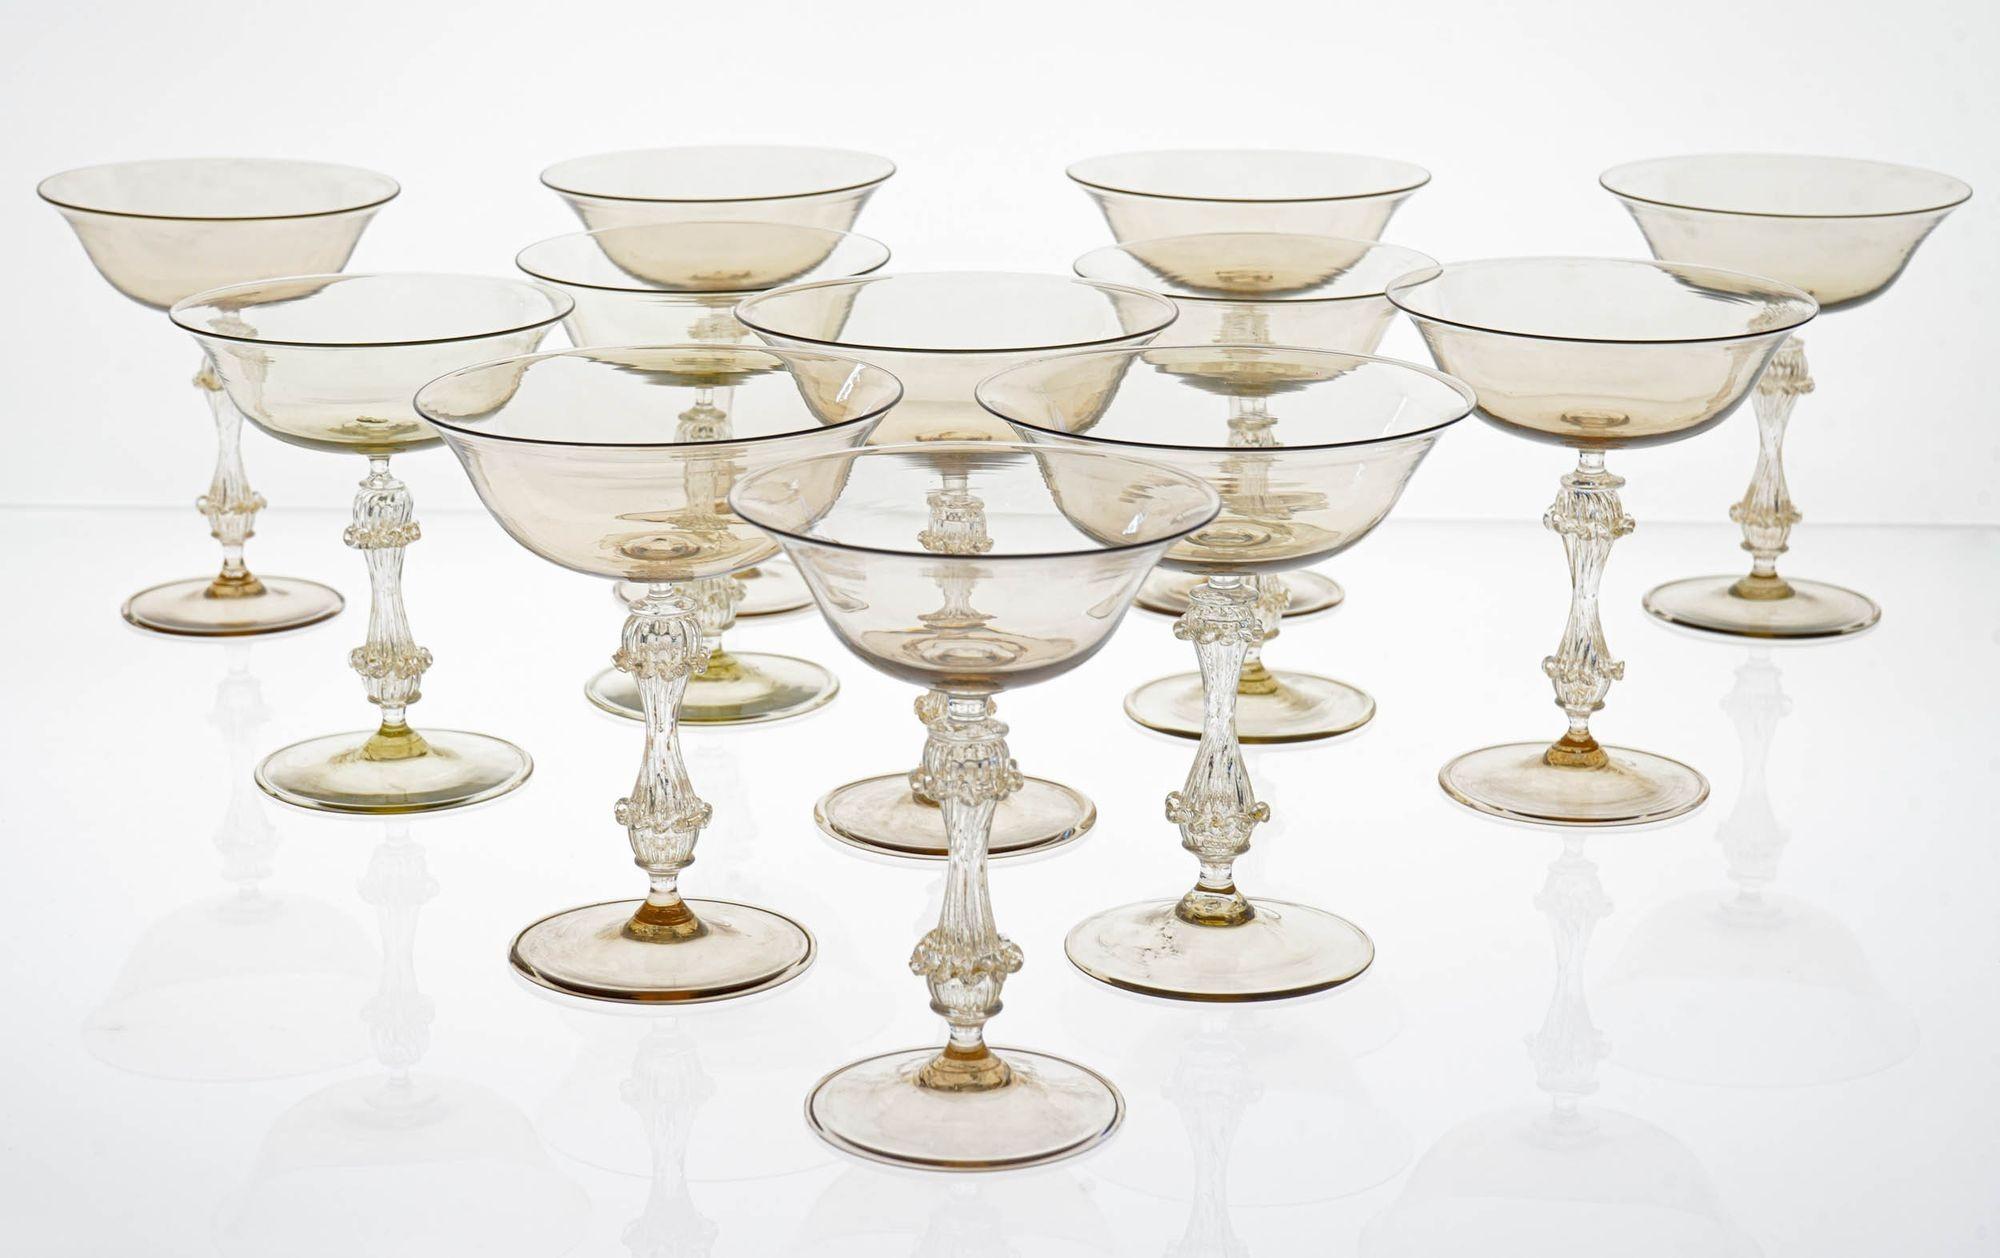 This exceptional set of 12 vintage champagne glasses is a rare and unique find.

Handmade in Murano, Italy by Cenedese, one of the most renowned glassmakers of the time, these glasses are a masterpiece of craftsmanship.

The glasses are made of